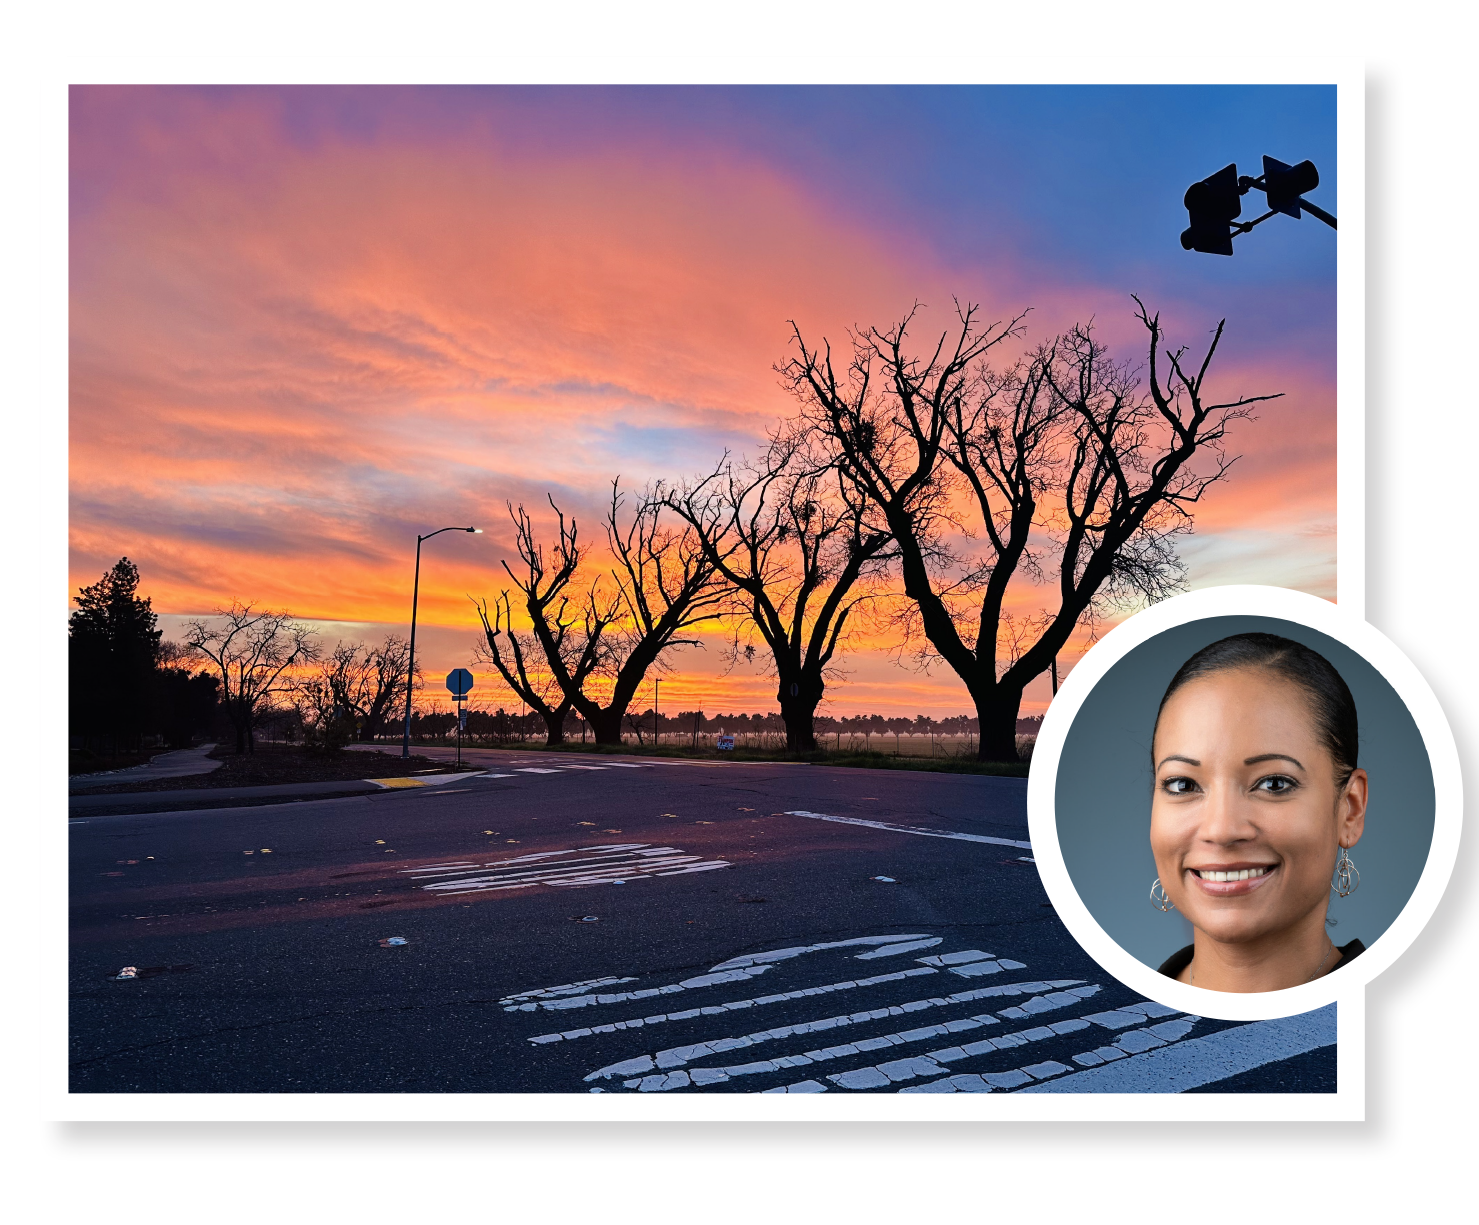 Sunset in Davis with an inset photo of Dr. Crystal Rogers.